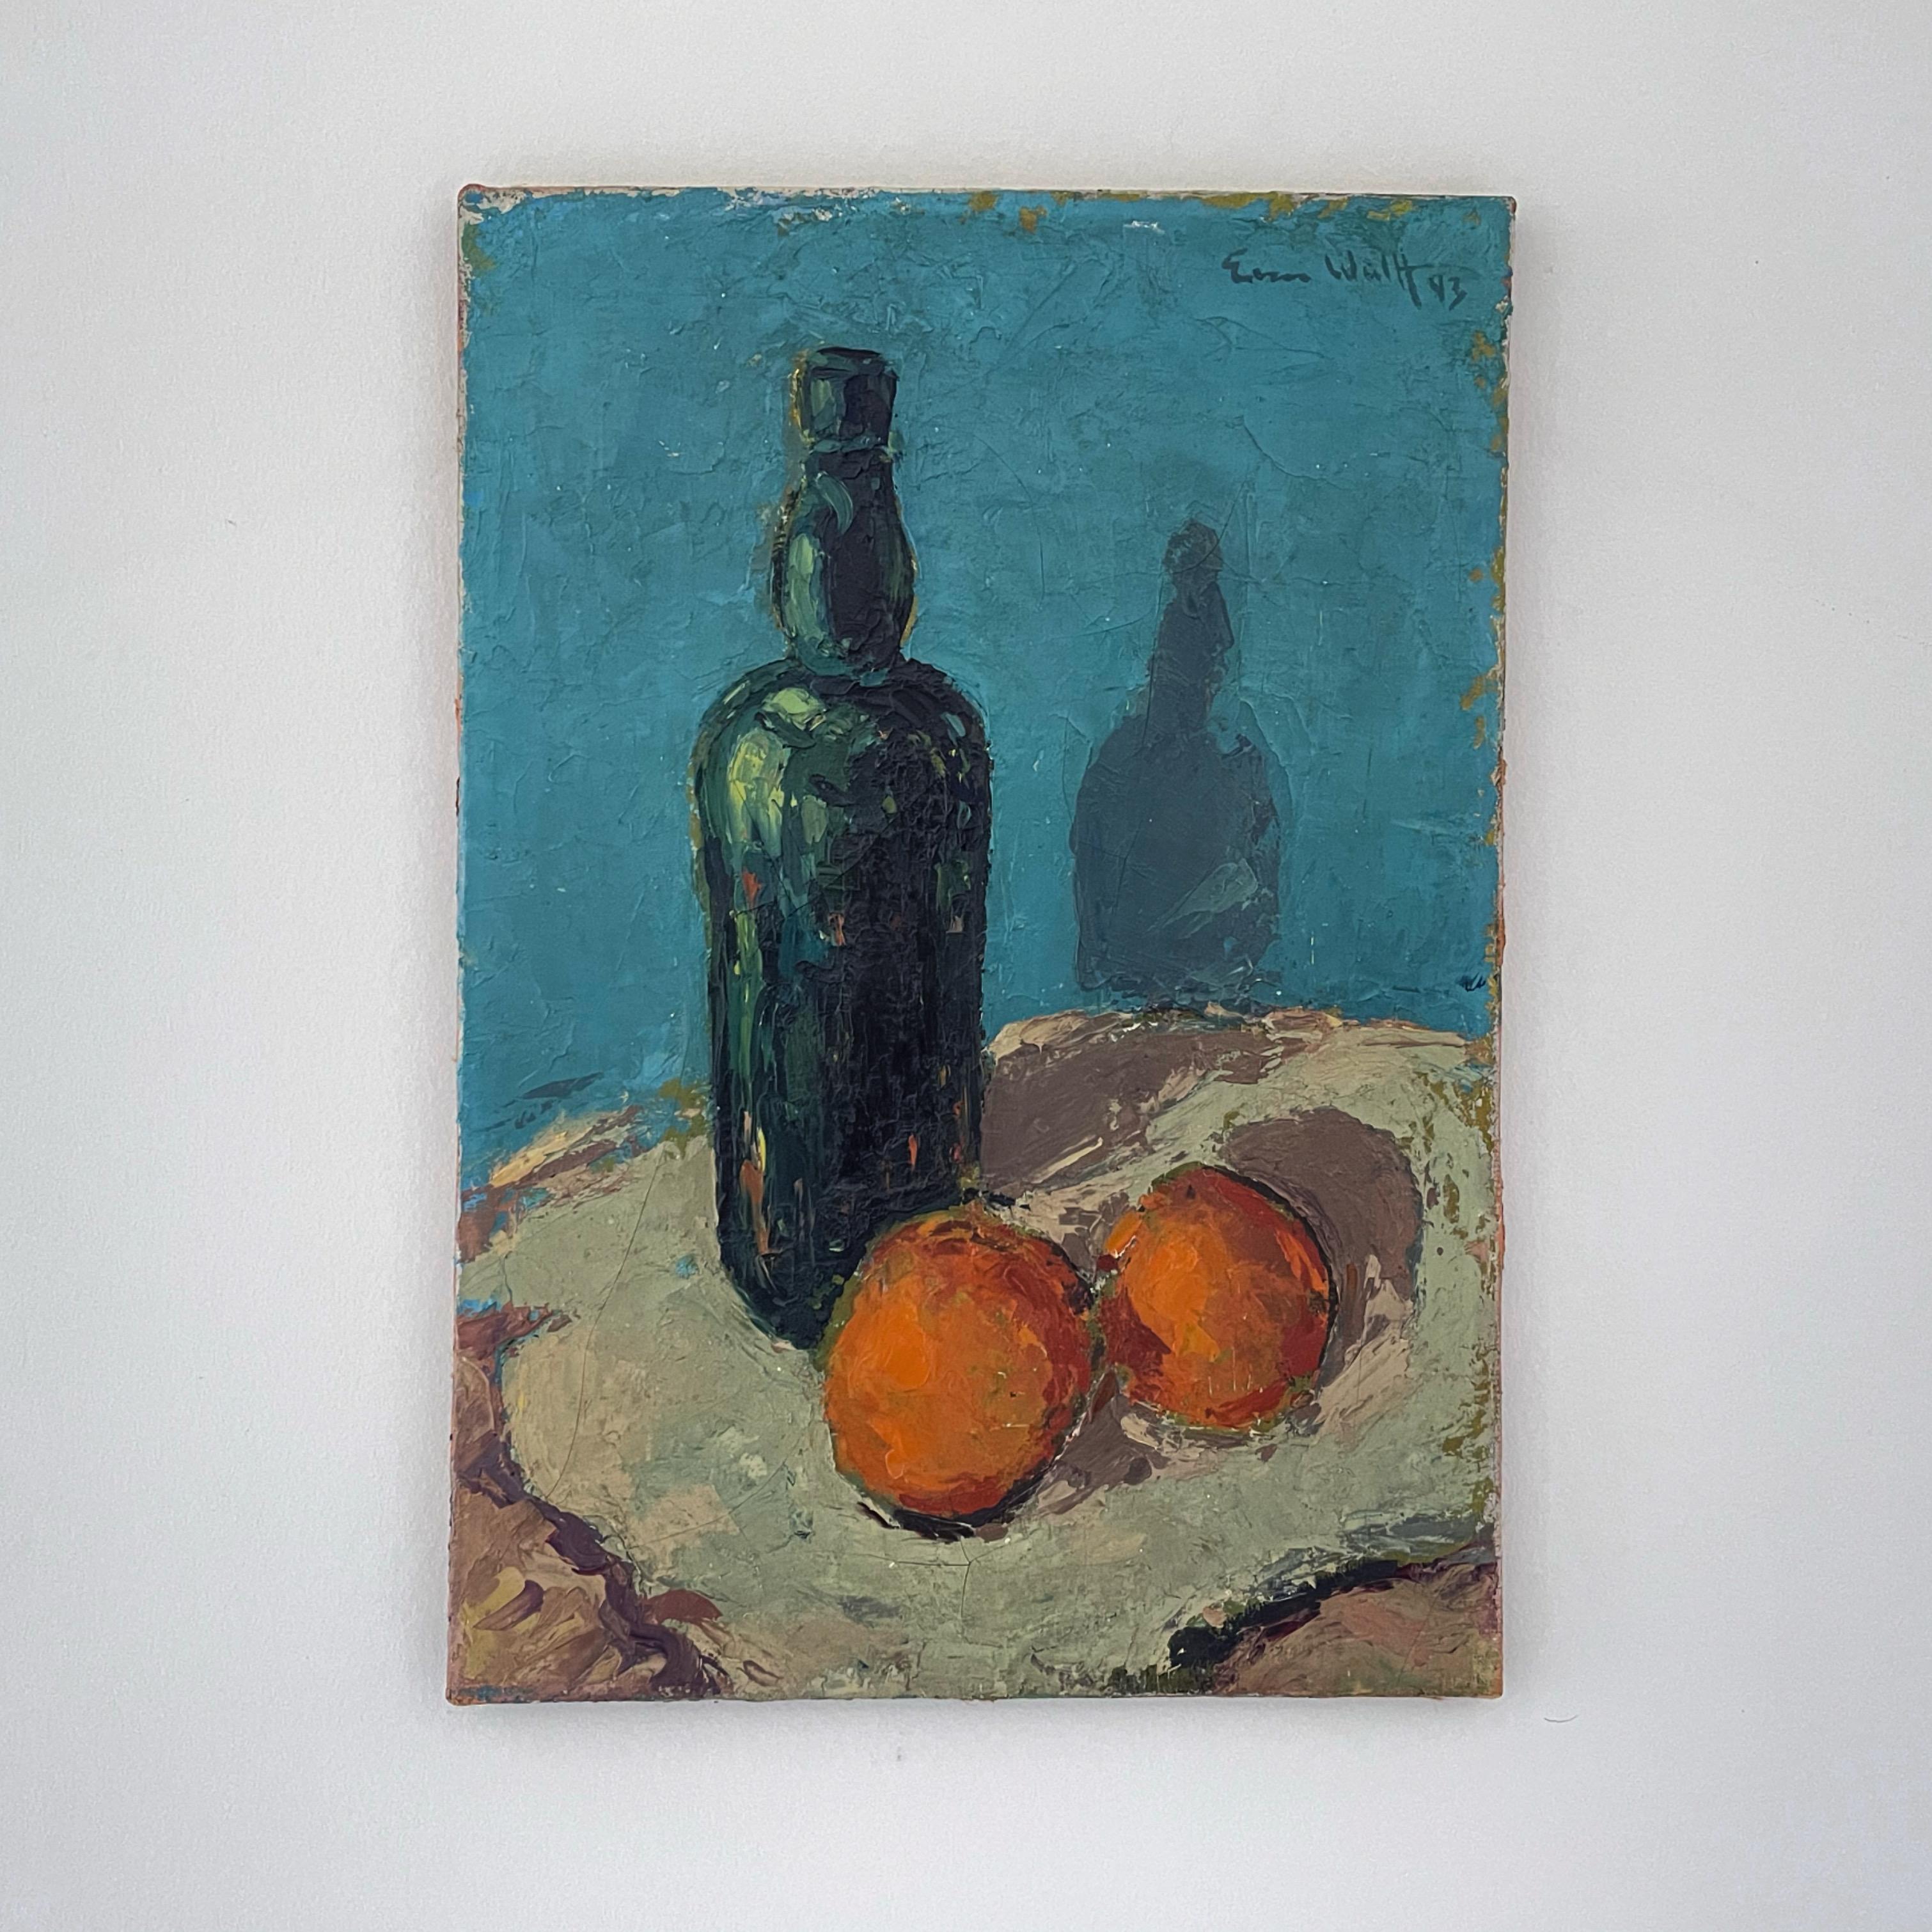 1943 War Period Textured Still Life Of Table With Oranges And Bottle For Sale 5